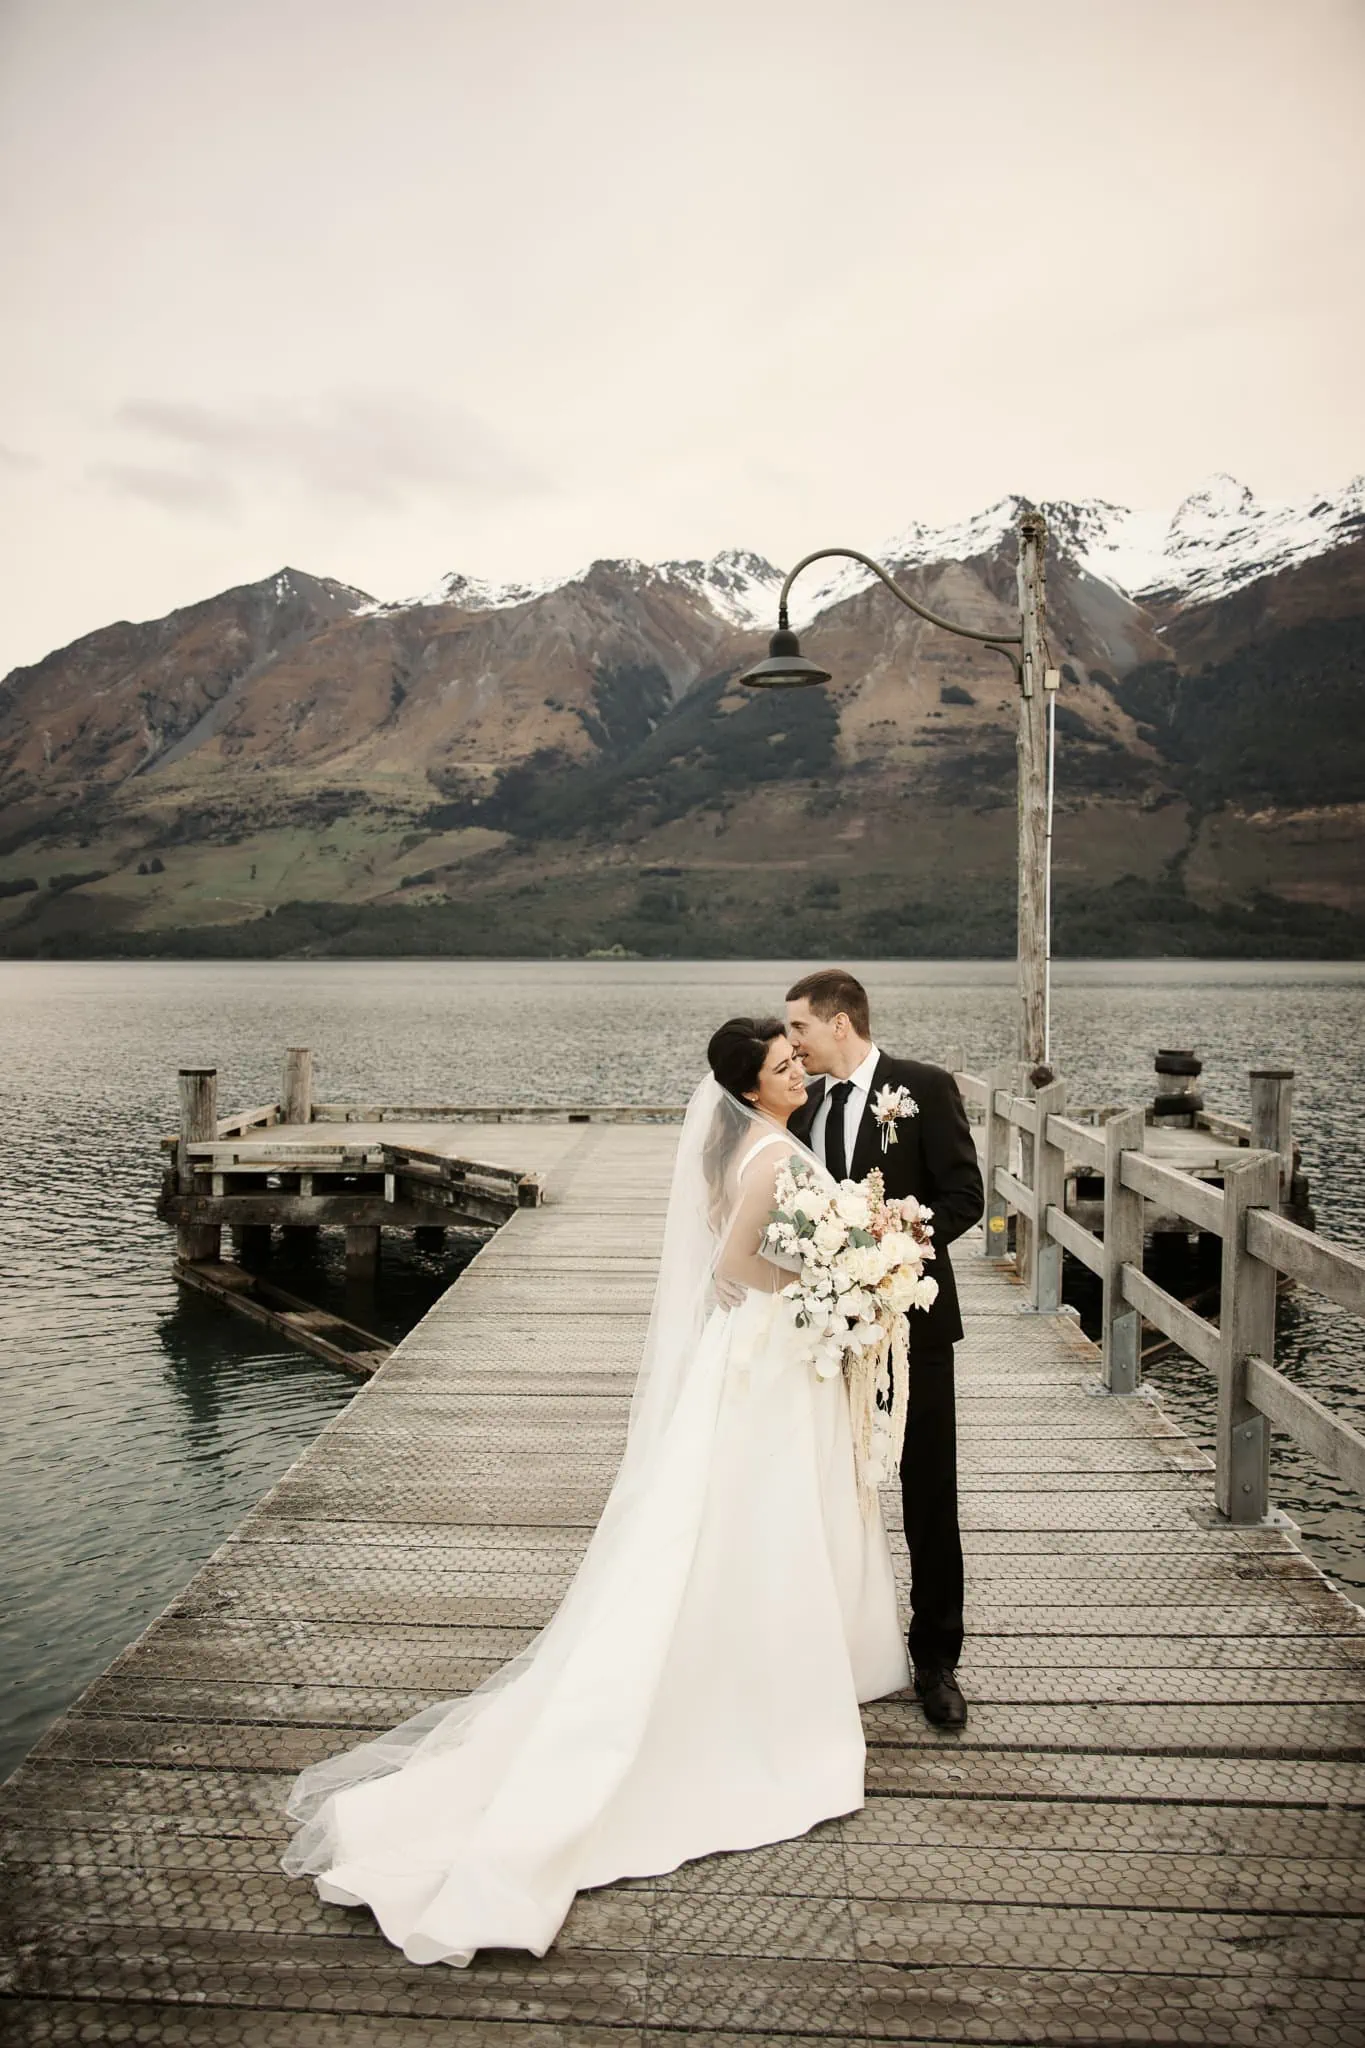 Michelle and Vedran sharing a romantic kiss during their Rees Valley Station elopement wedding at Lake Wanaka.